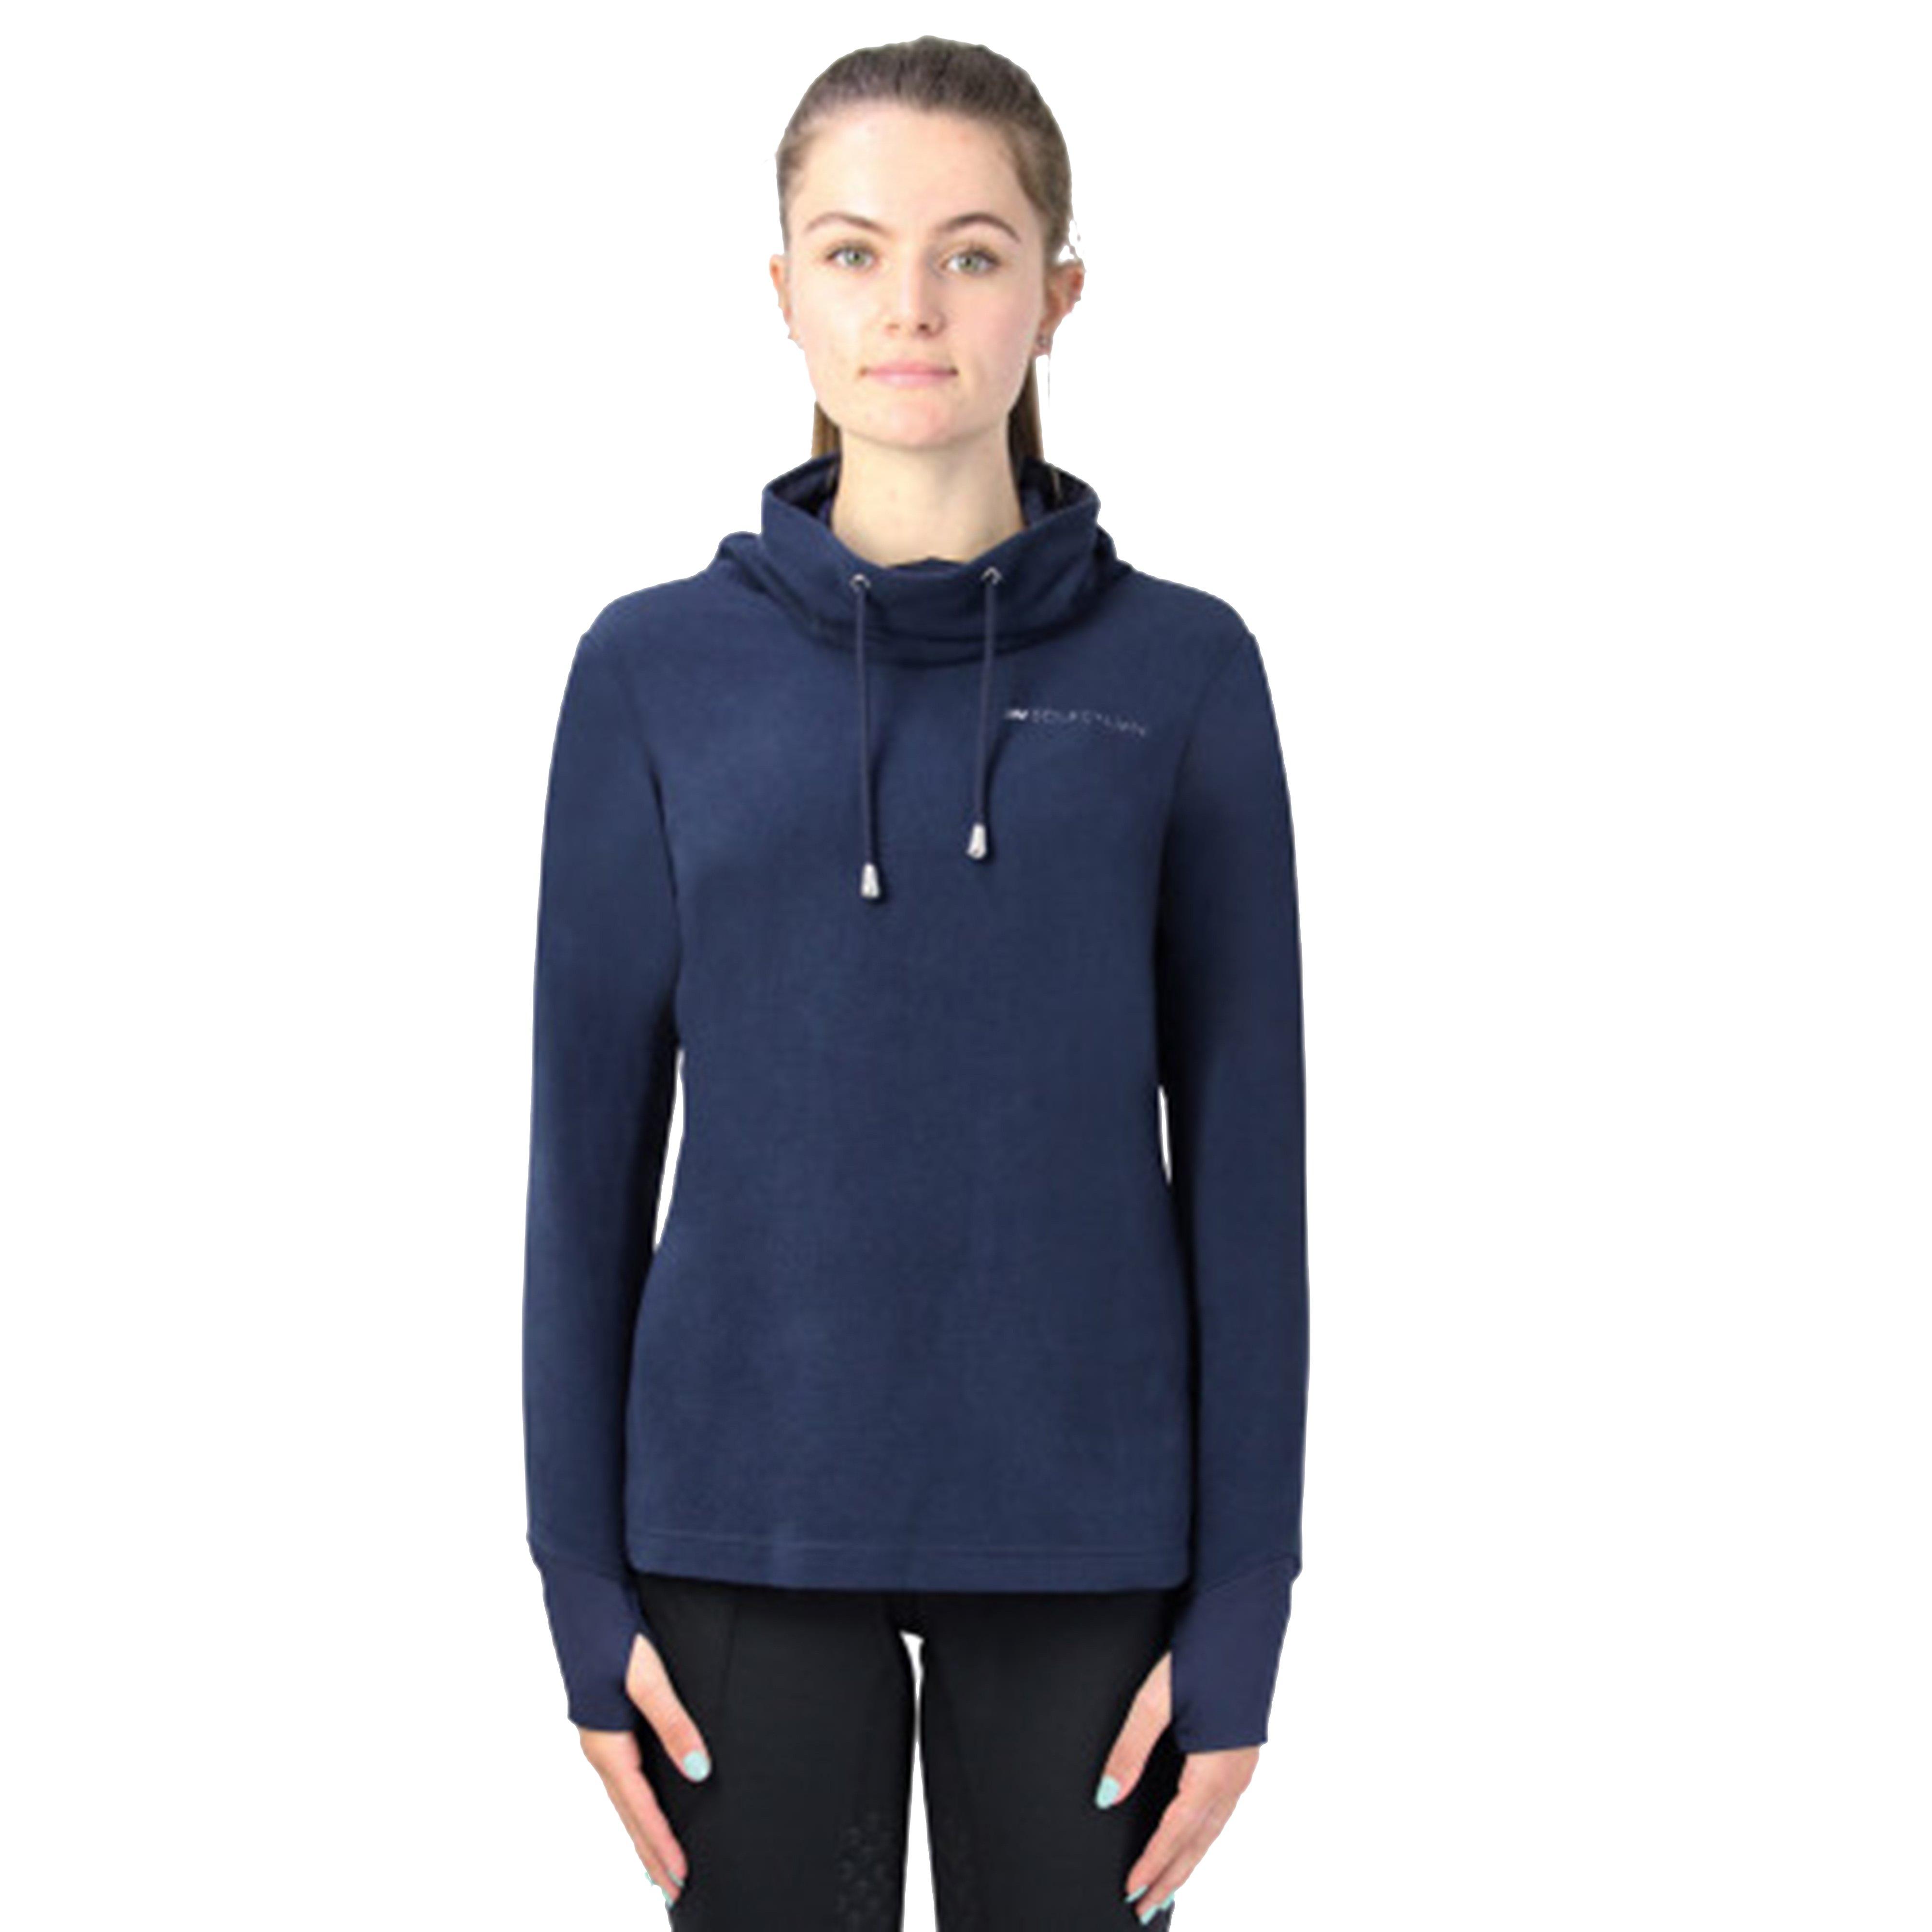 Womens Synergy Cowl Neck Top Navy